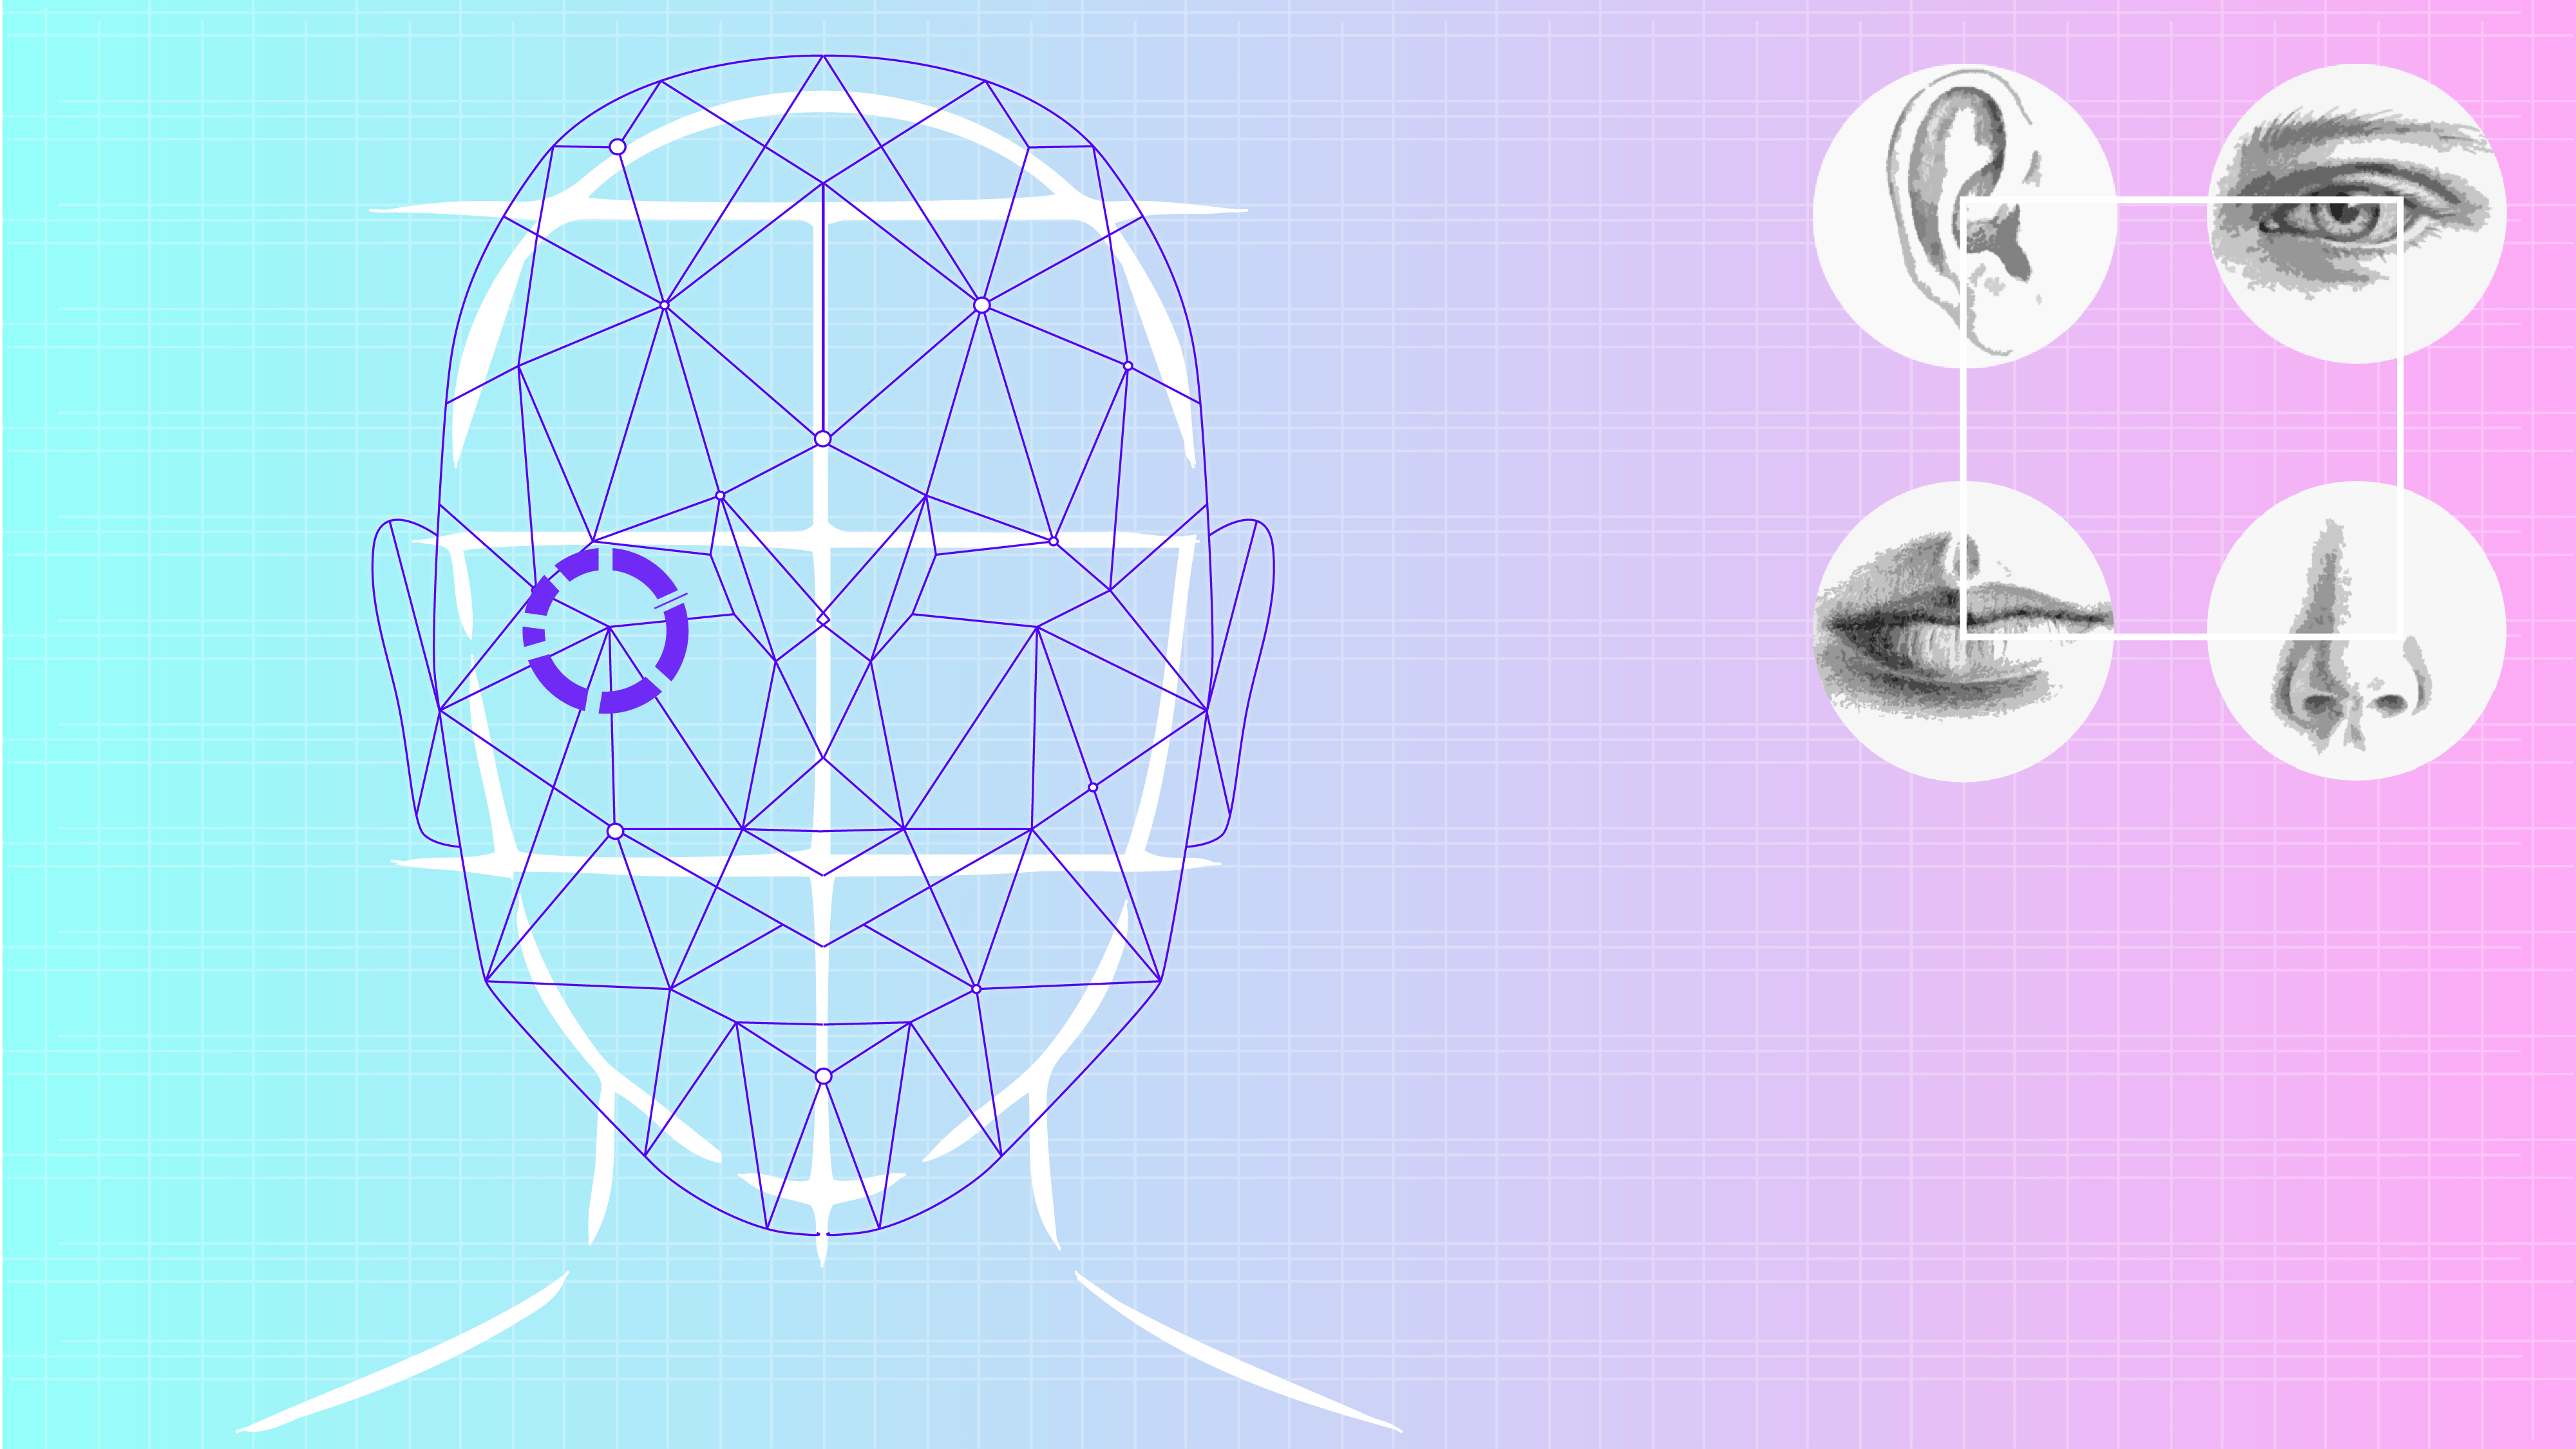 Facial recognition systems decide your gender for you. Activists say it needs to stop.